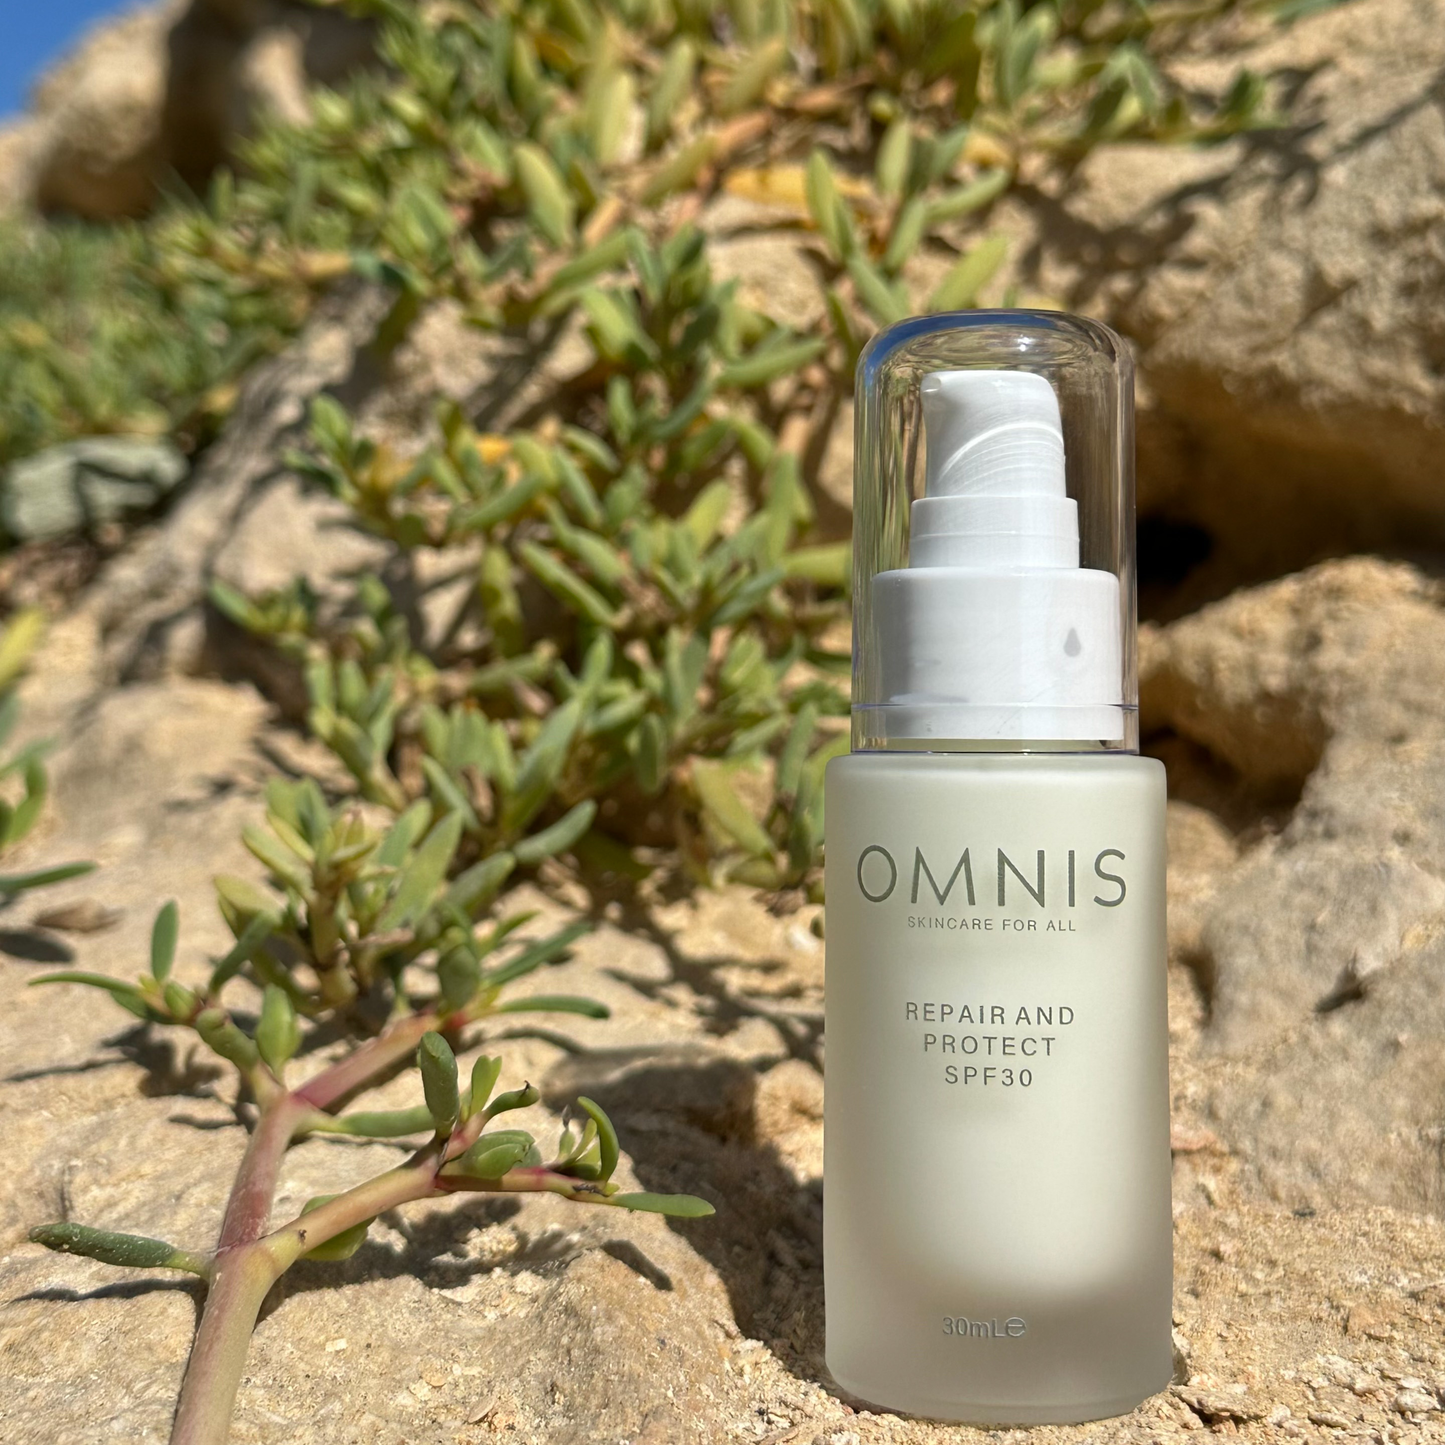 Photo of the Omnis Repair & Protect SPF30 bottle sitting on a pale yellow rock next to the greenery growing out of it 